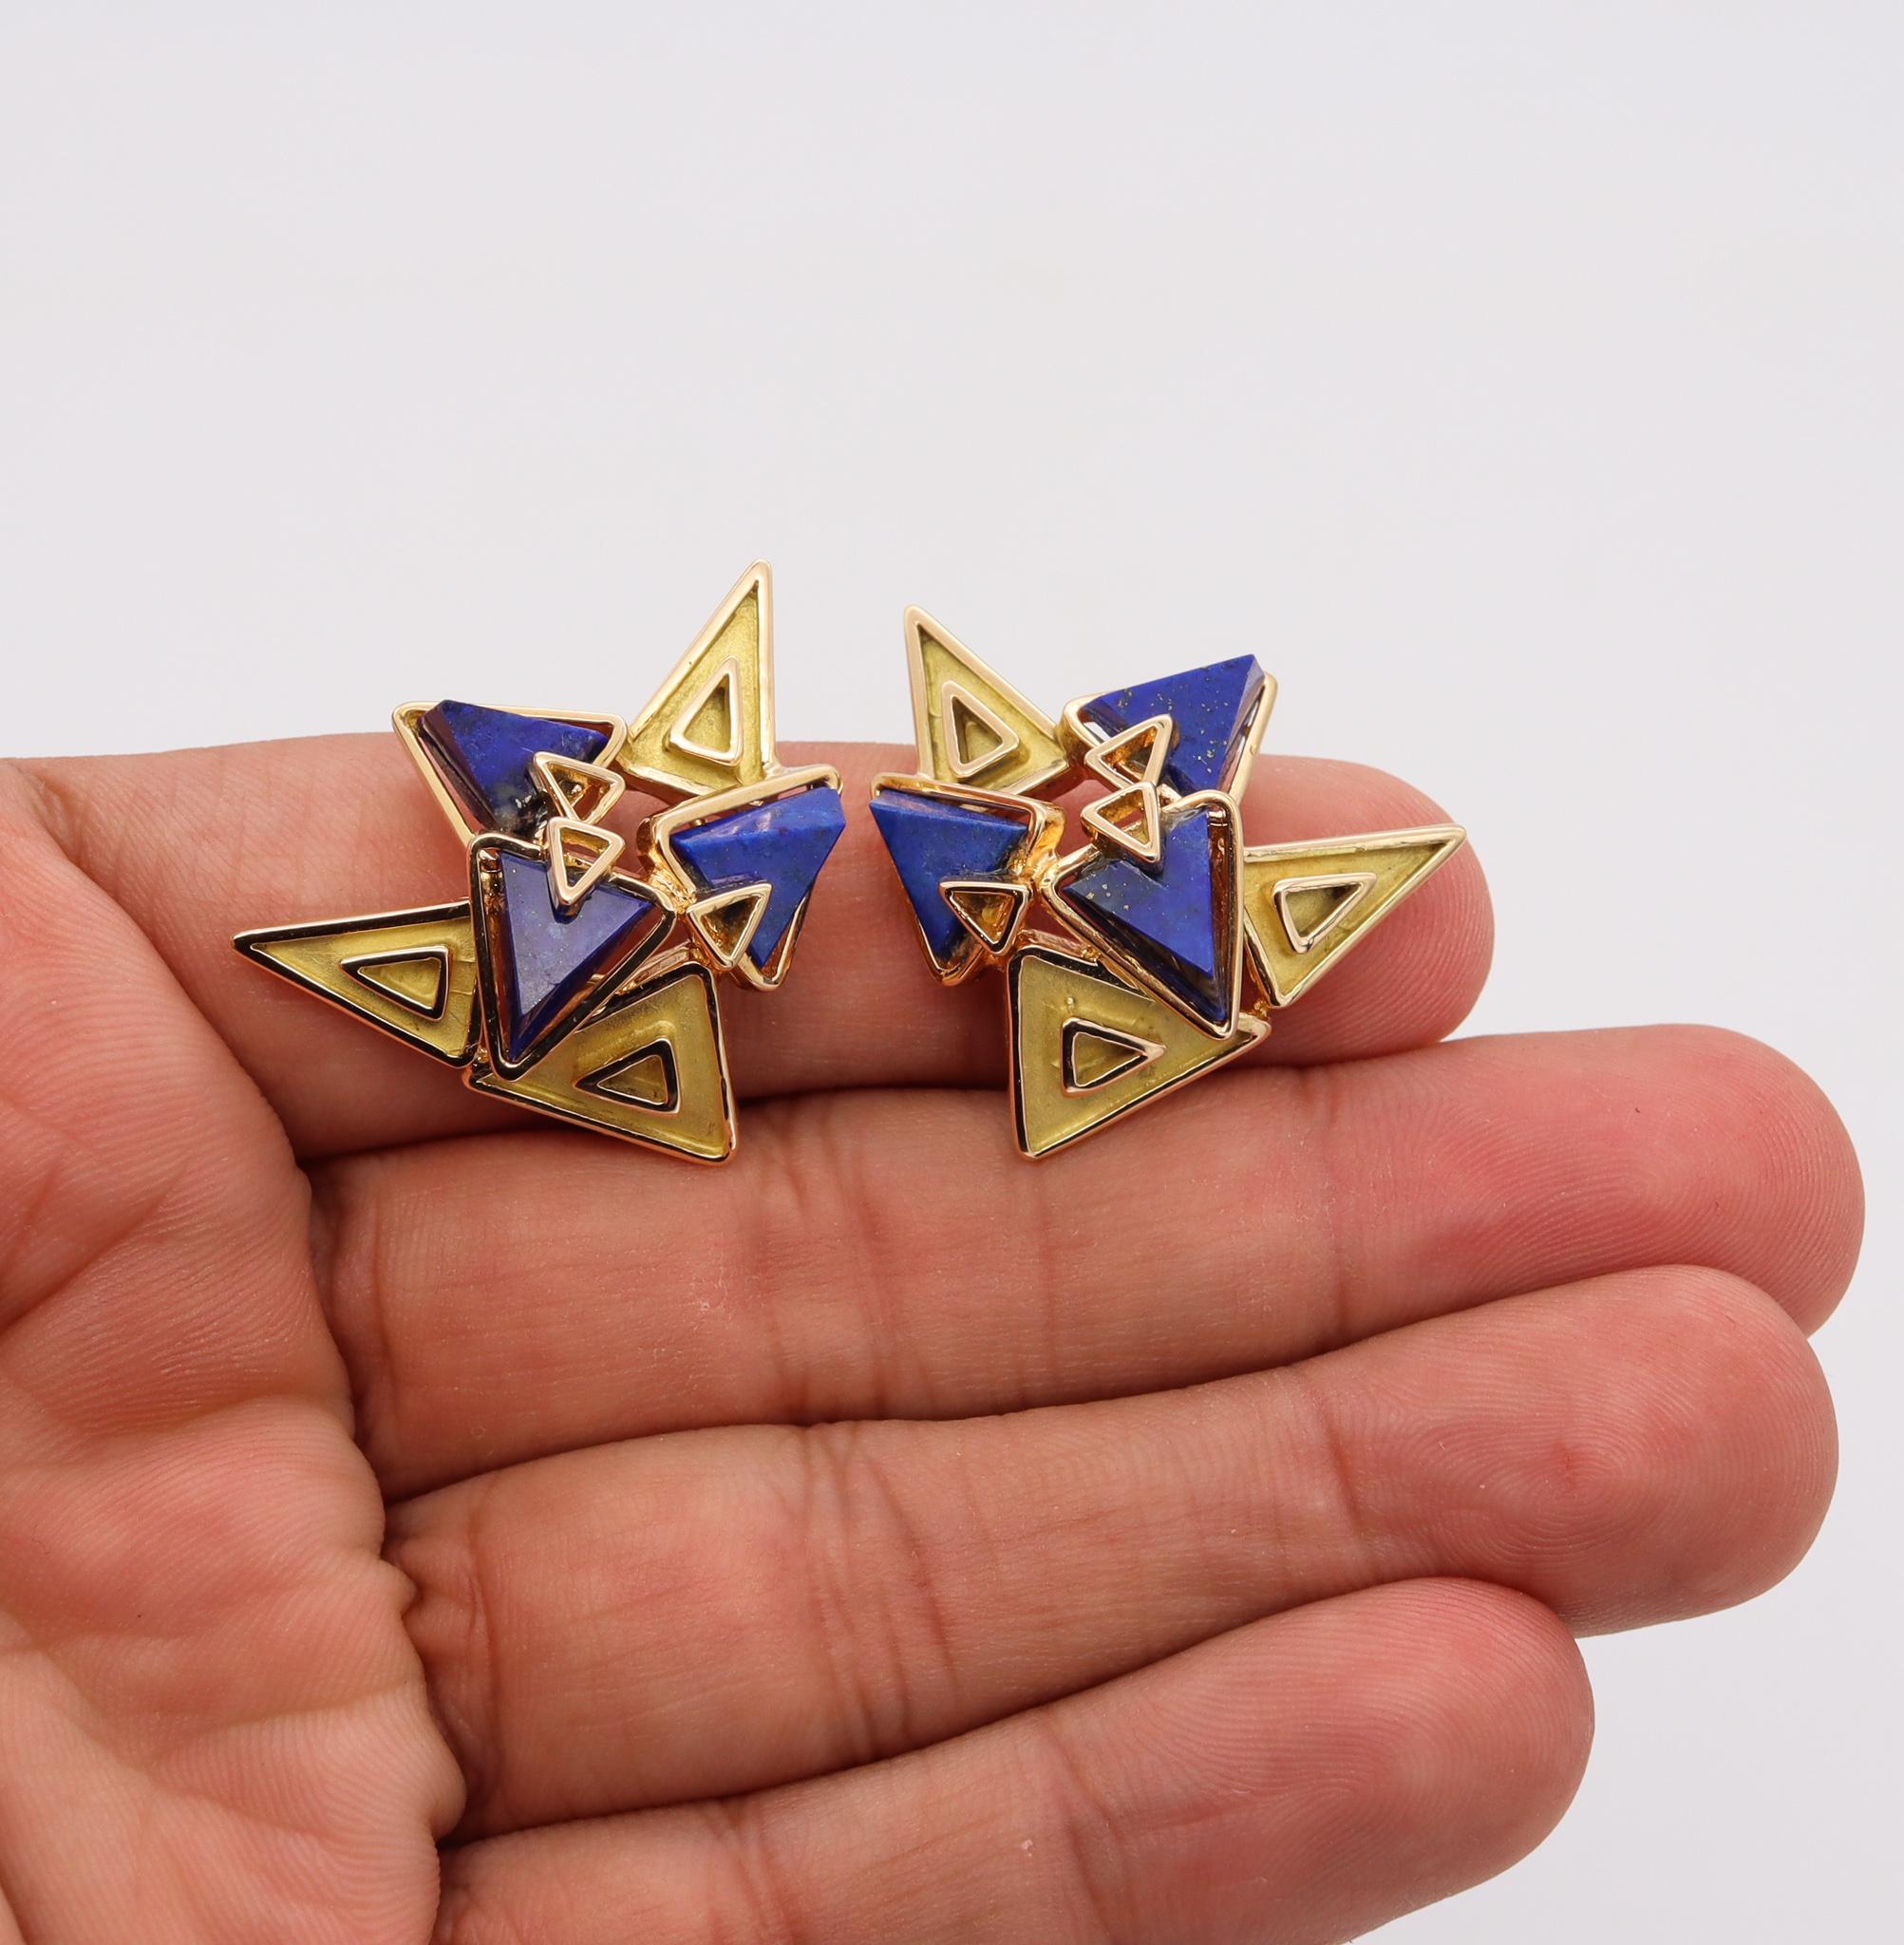 Chaumet Paris 1970 Rare Geometric Clip-on Earrings 18Kt Gold With Carved Lapis In Excellent Condition For Sale In Miami, FL